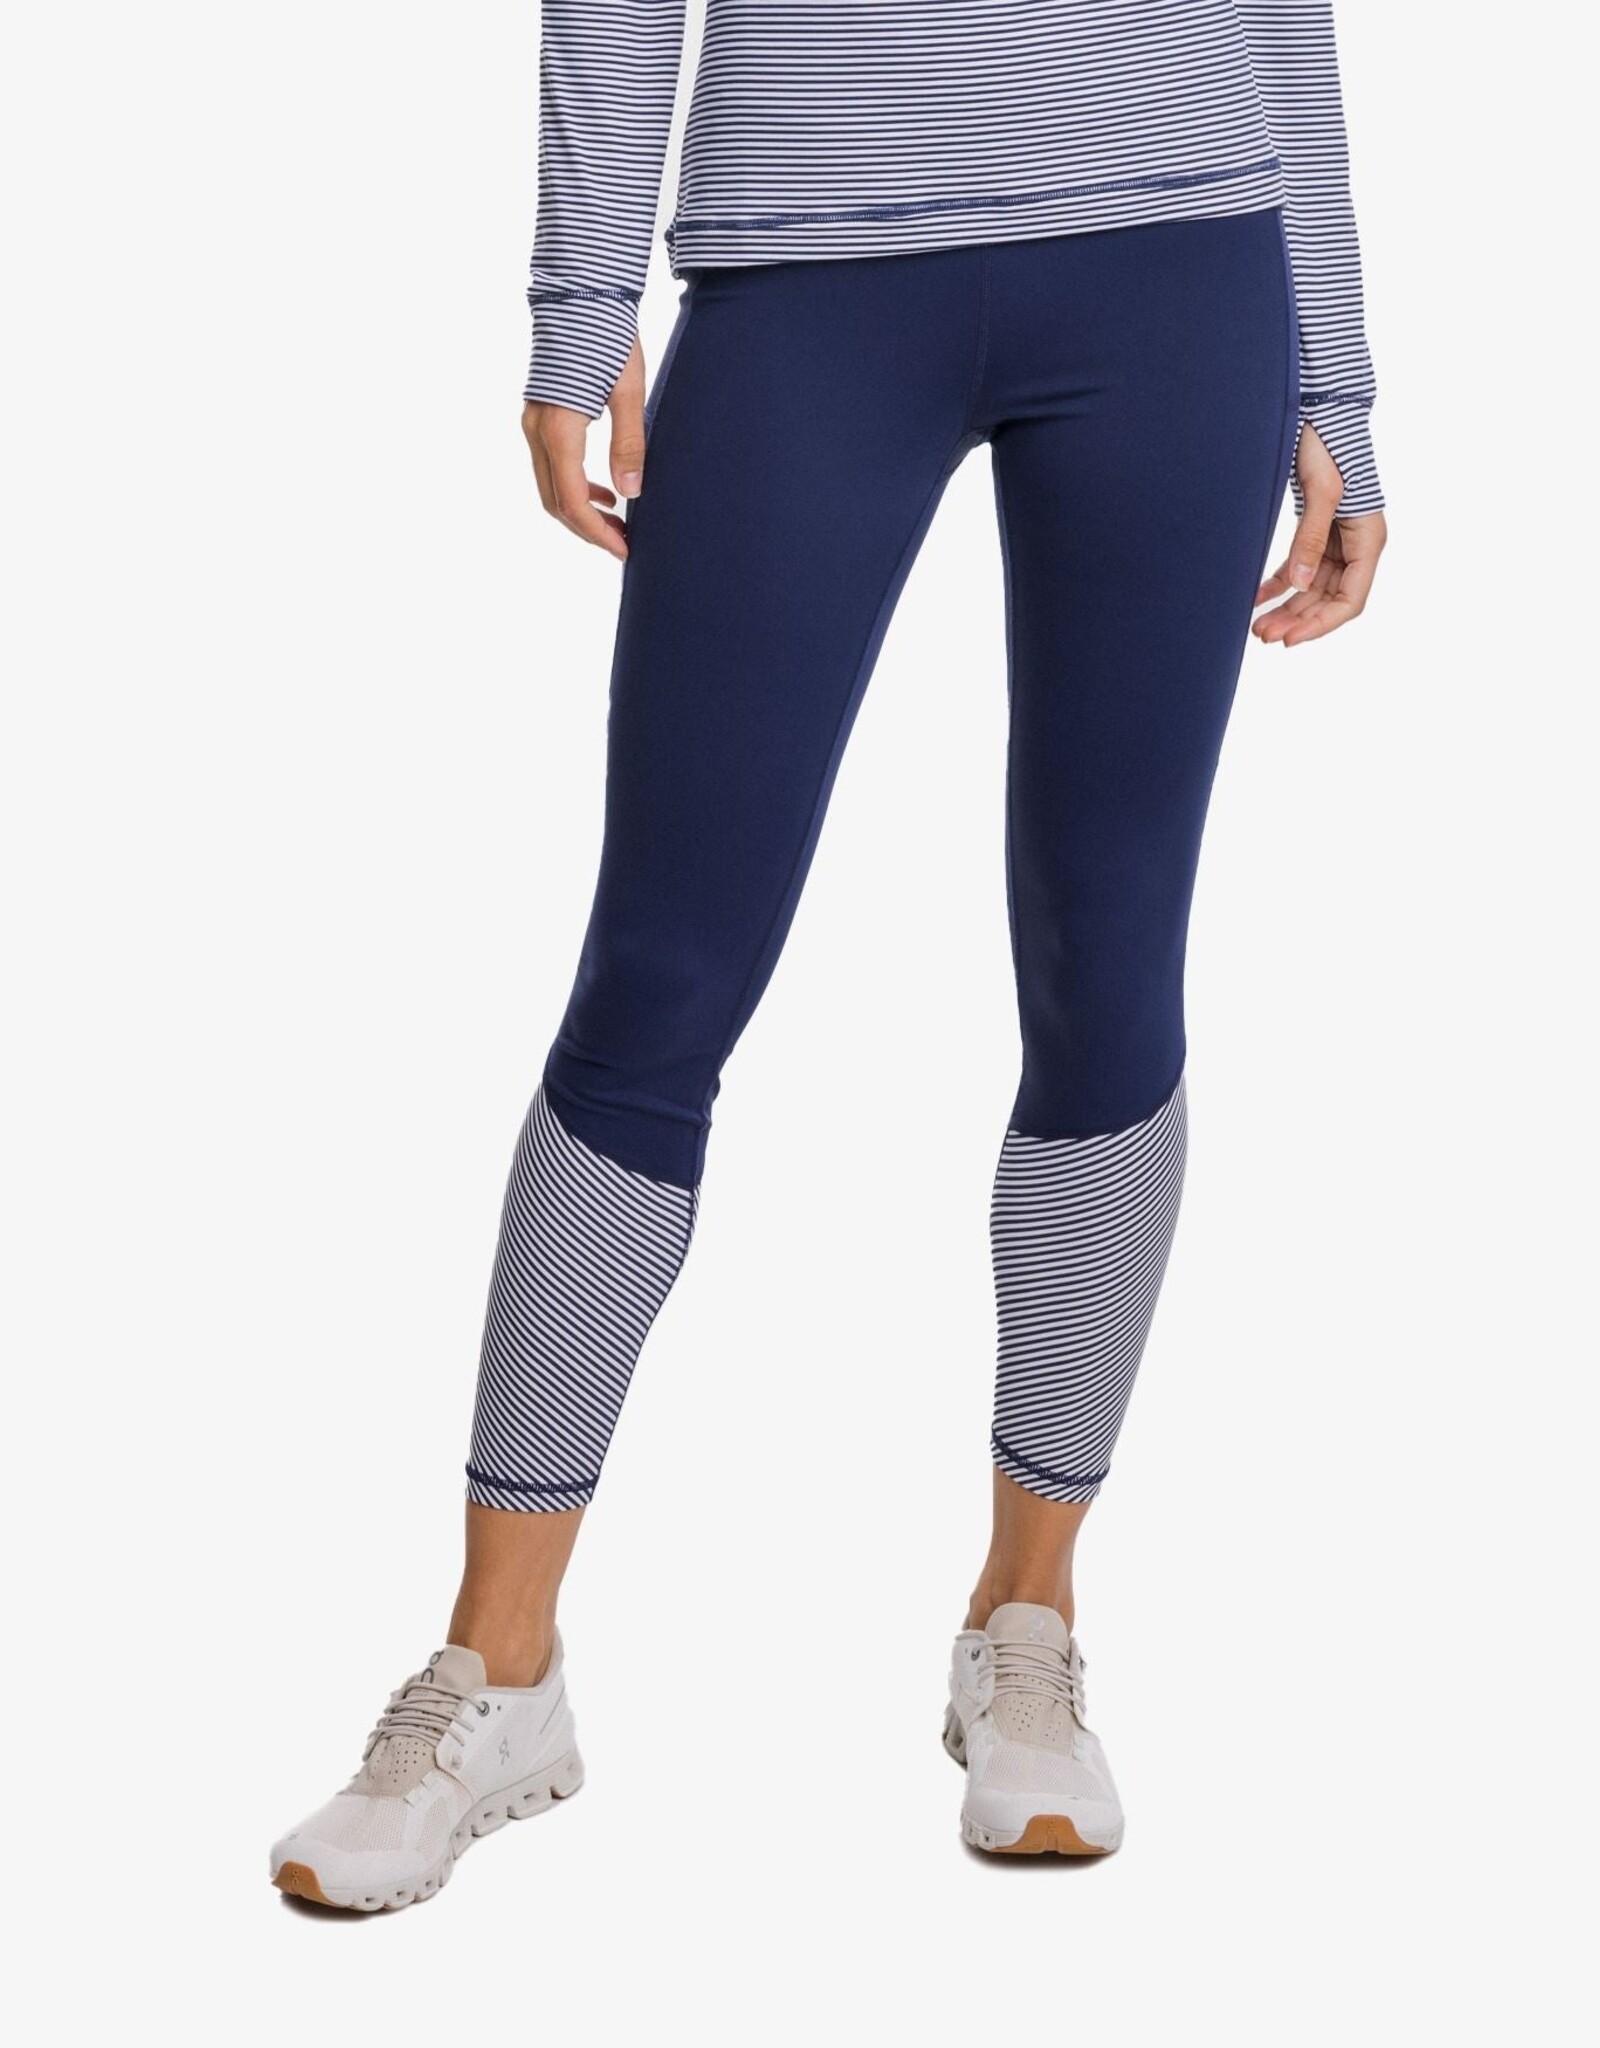 Southern Tide Colorblock High Waisted Legging - REDIX